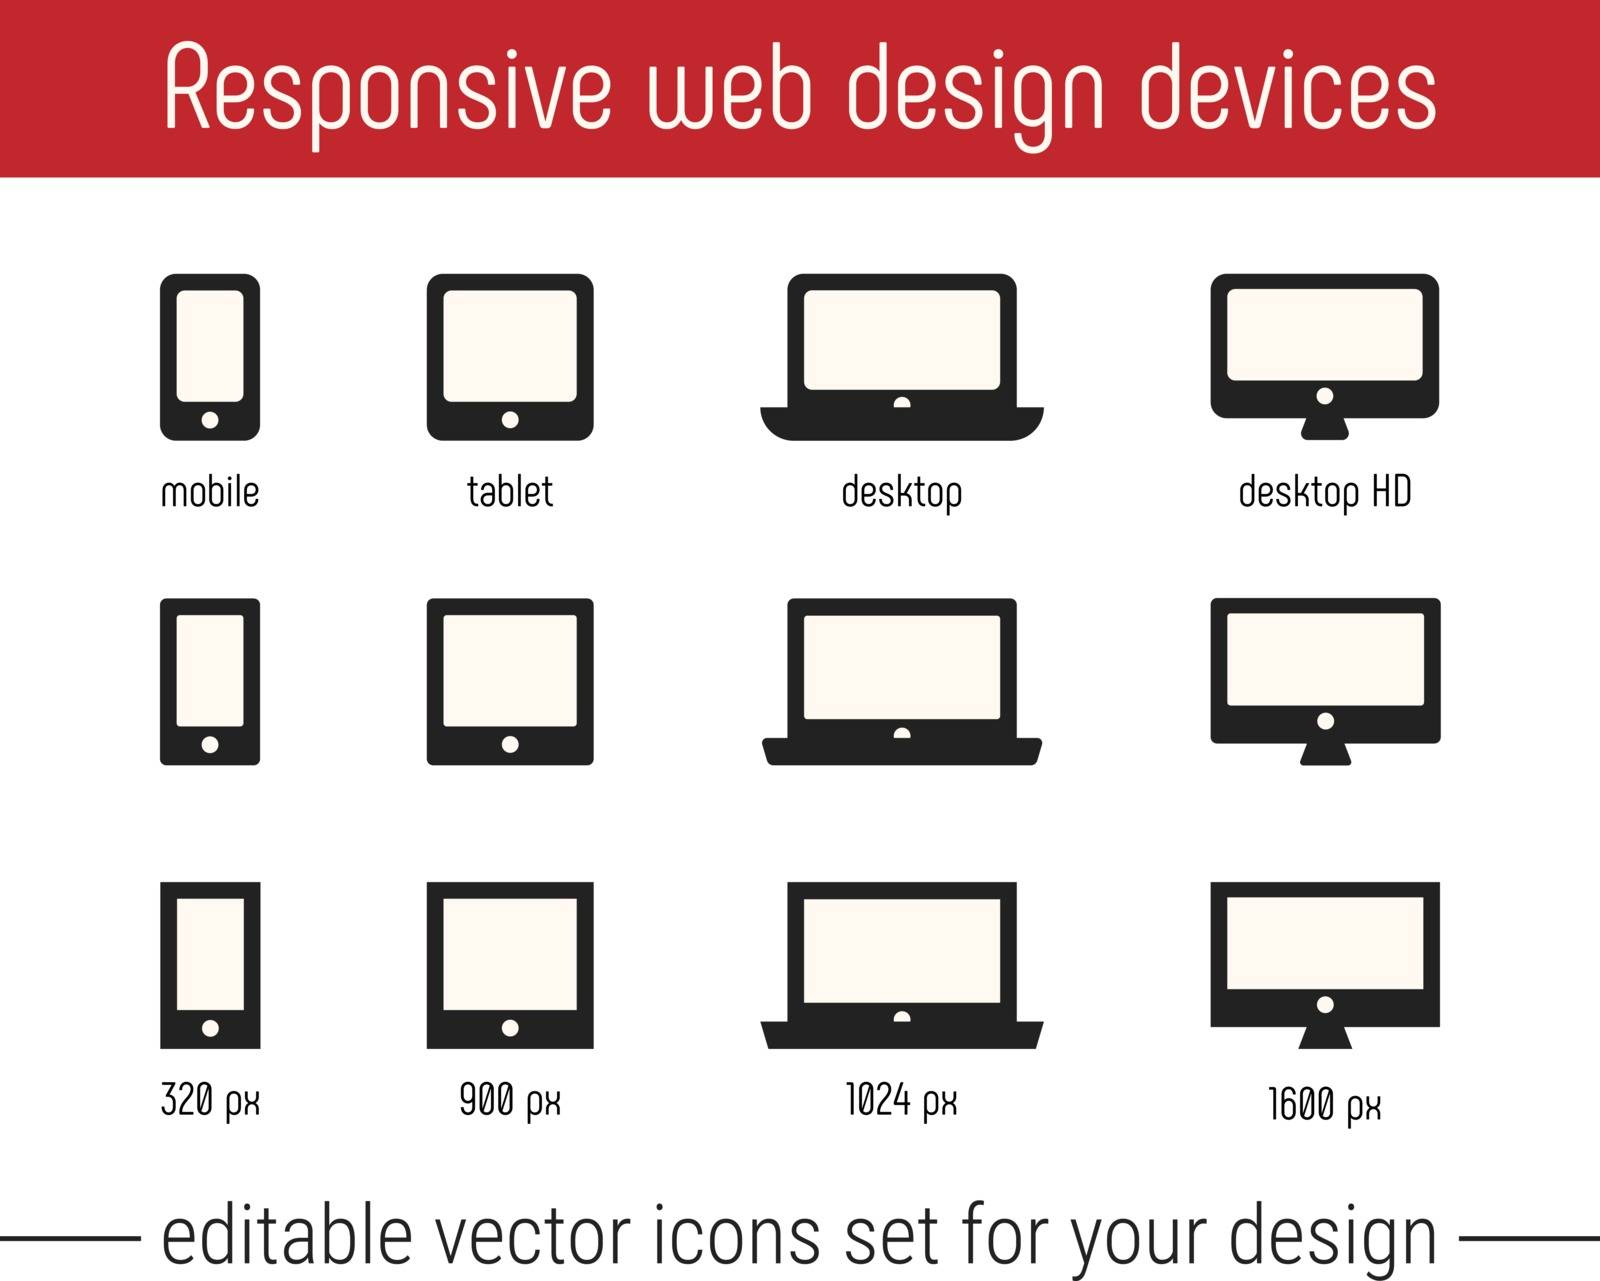 Responsive icon vector images. Flat responsive design icons vector. Responsive icon vector images set for website, app design. Responsive design icons vector set with mobile, tablet, desktop devices.